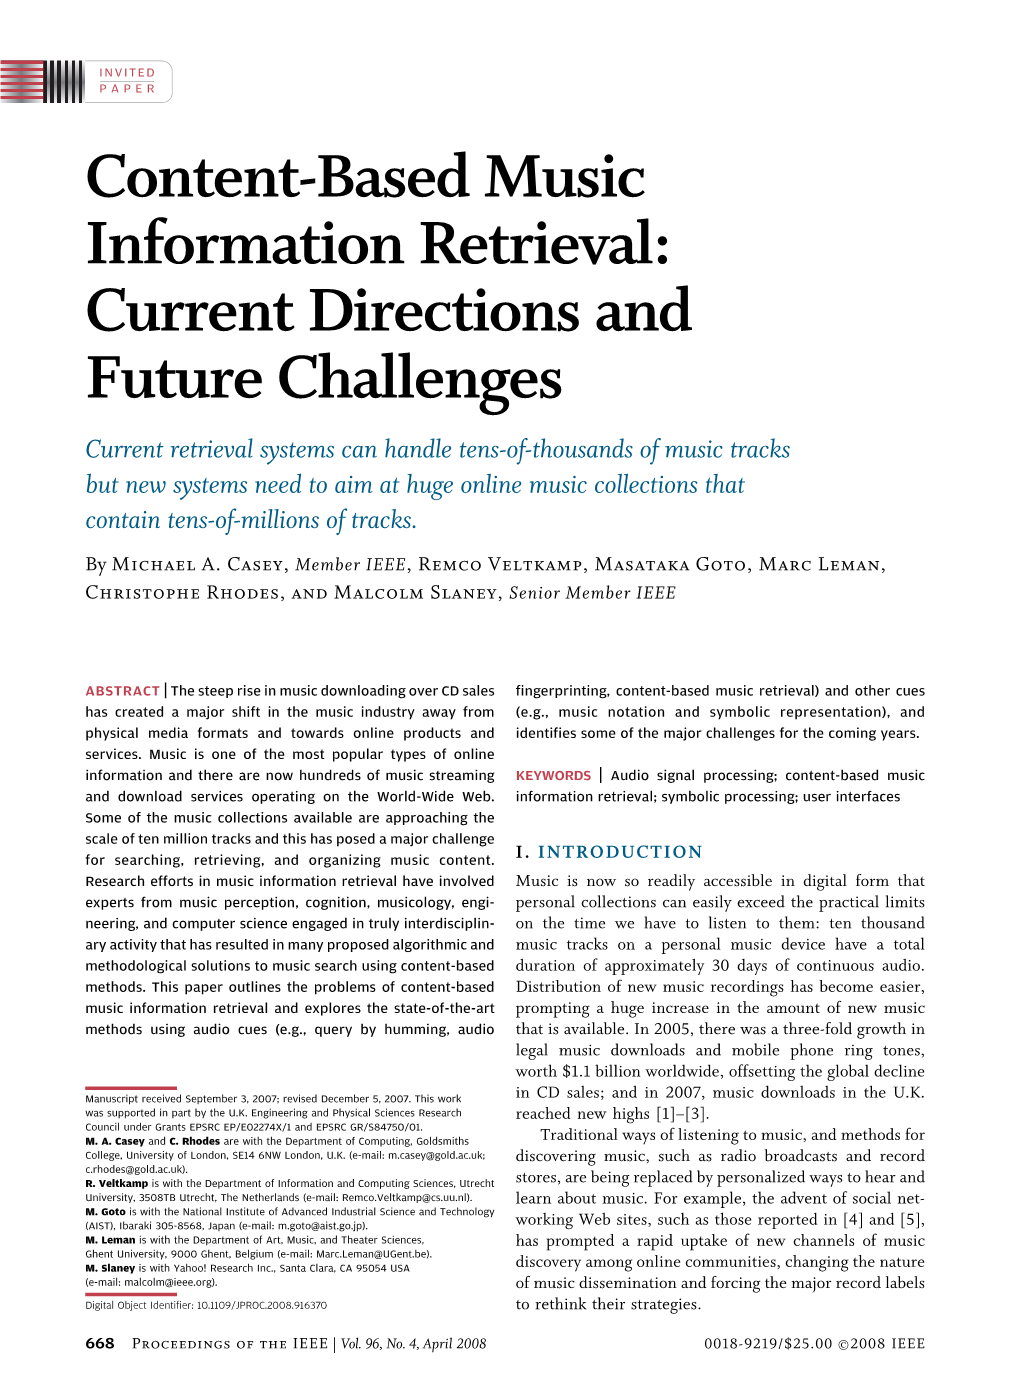 Content-Based Music Information Retrieval